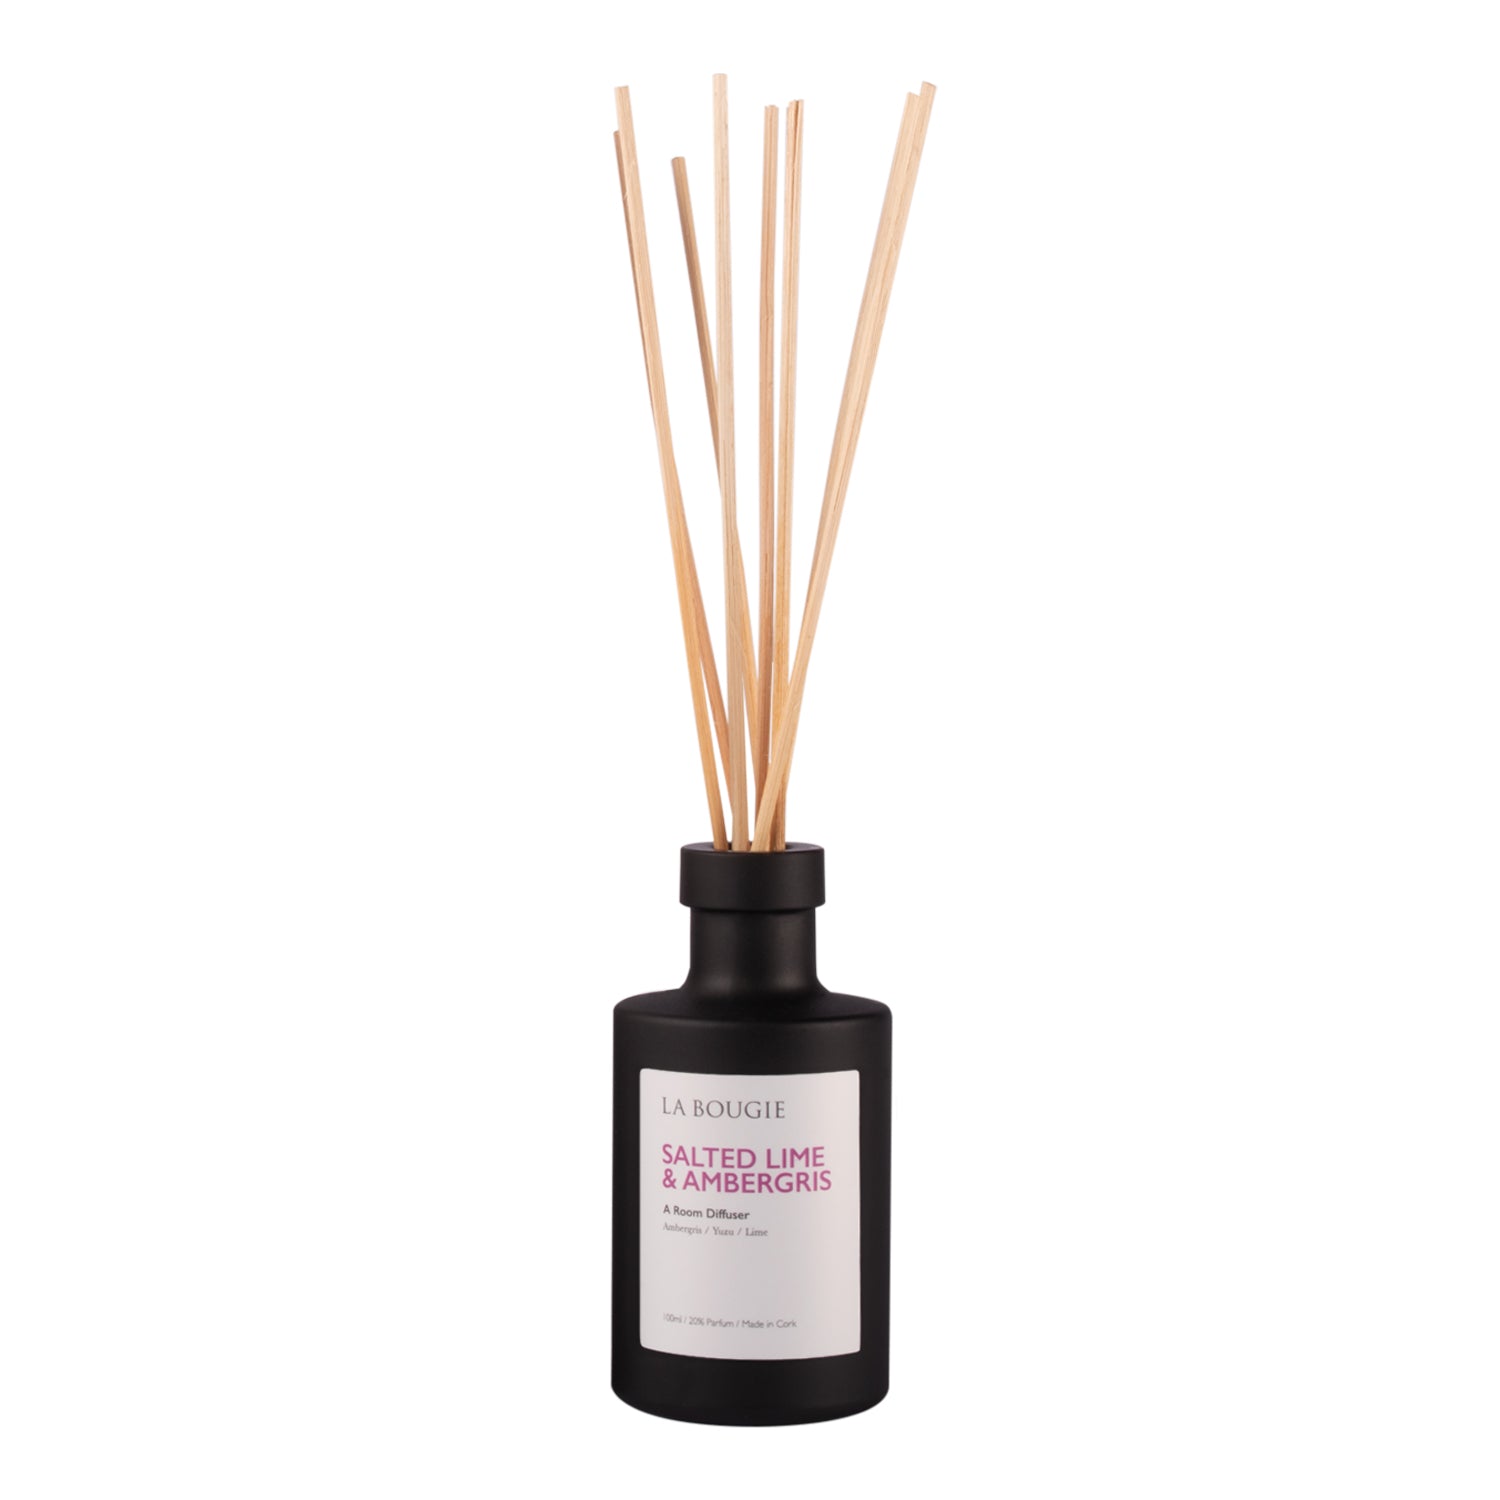 Salted Lime and Ambergris Diffuser